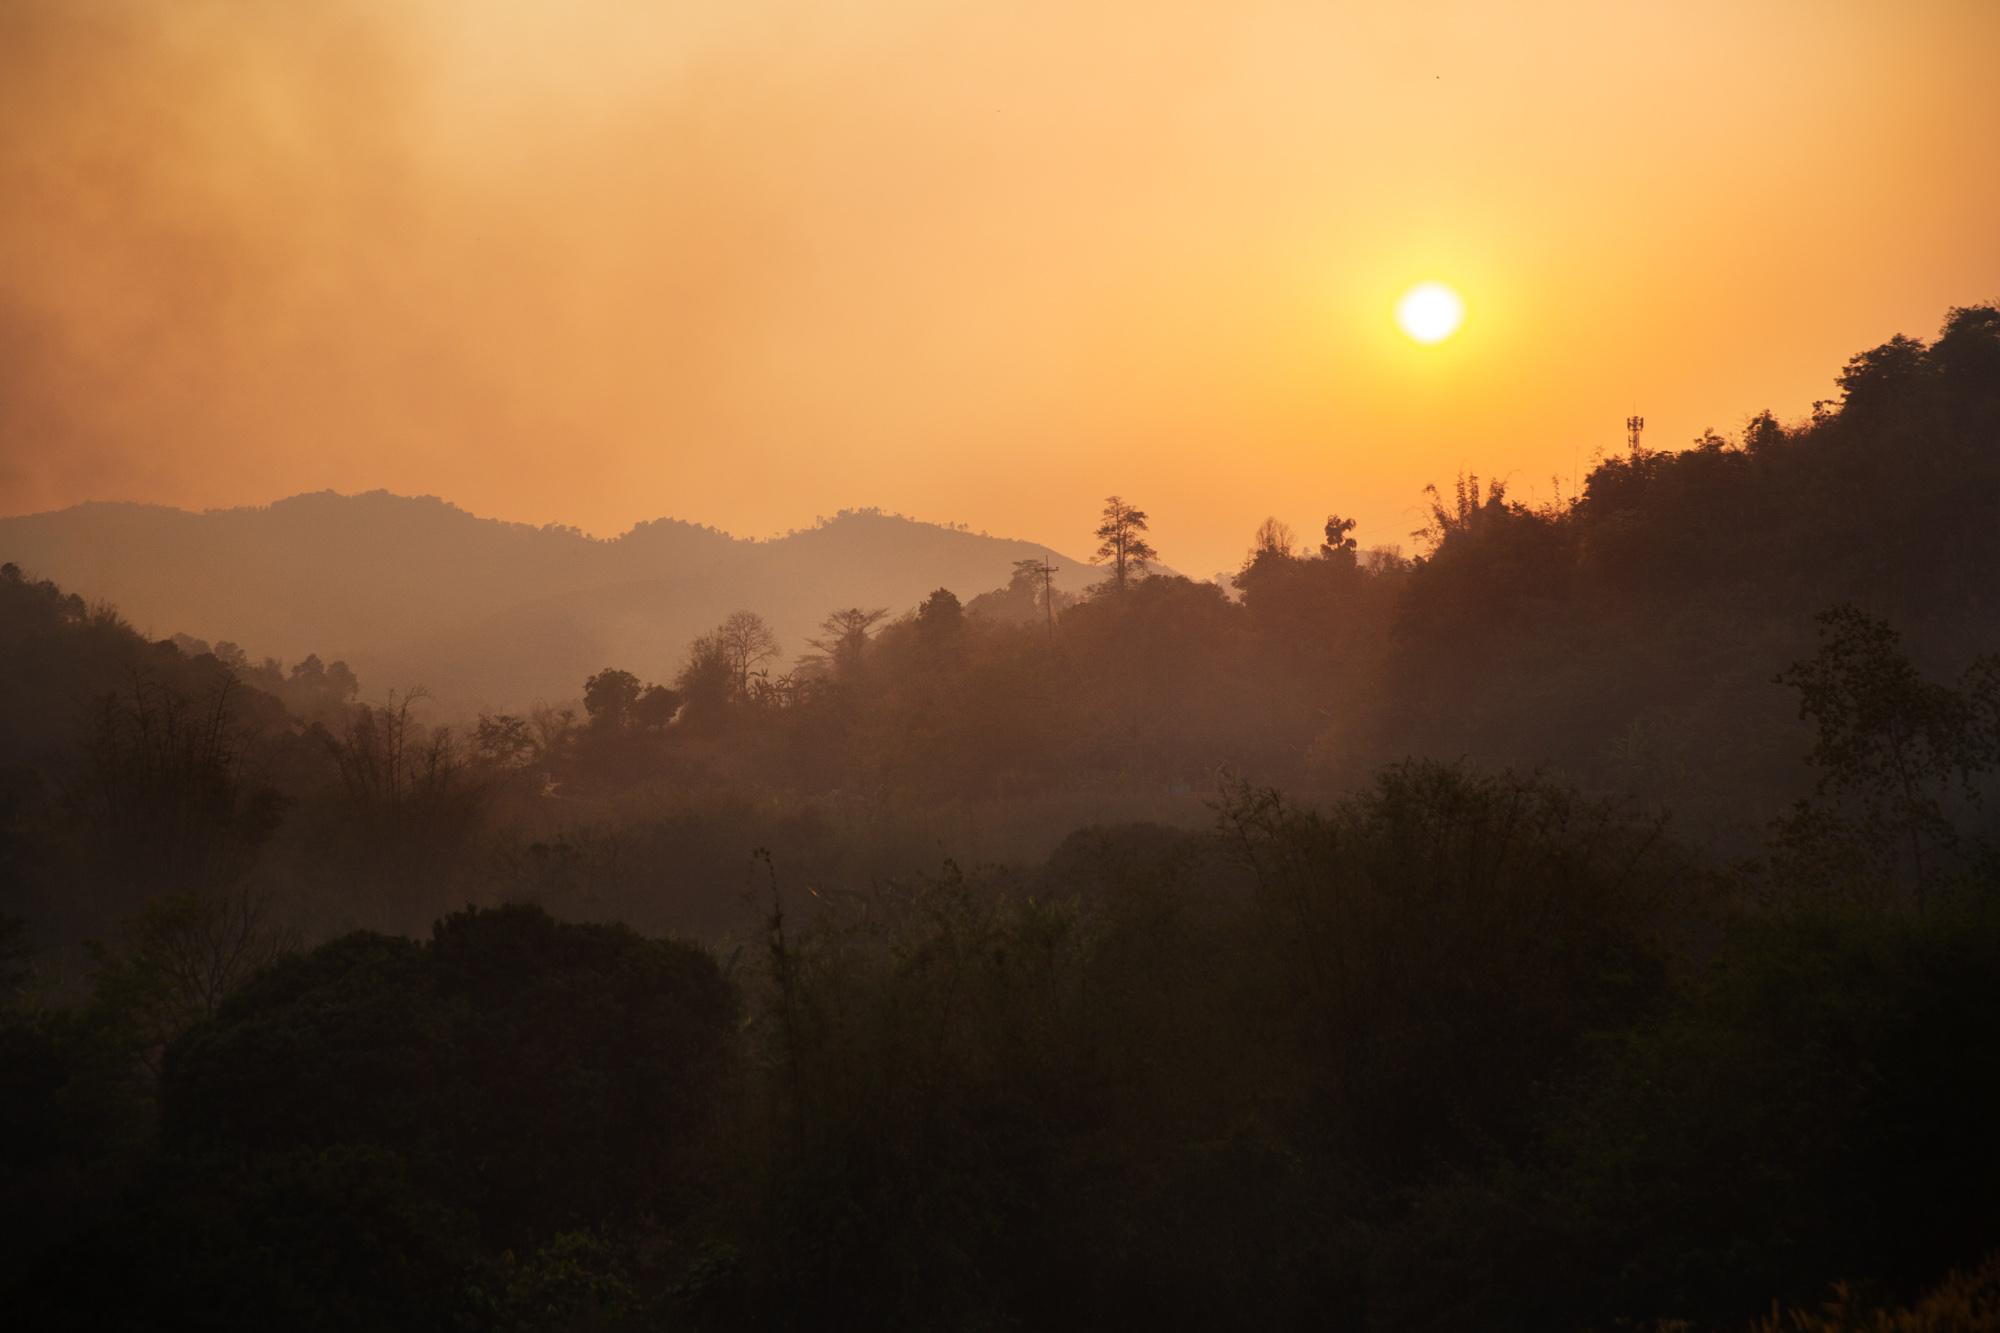 Smoke from multiple forest fires fills the air over a mountain range at sunset near the Thai-Myanmar border.